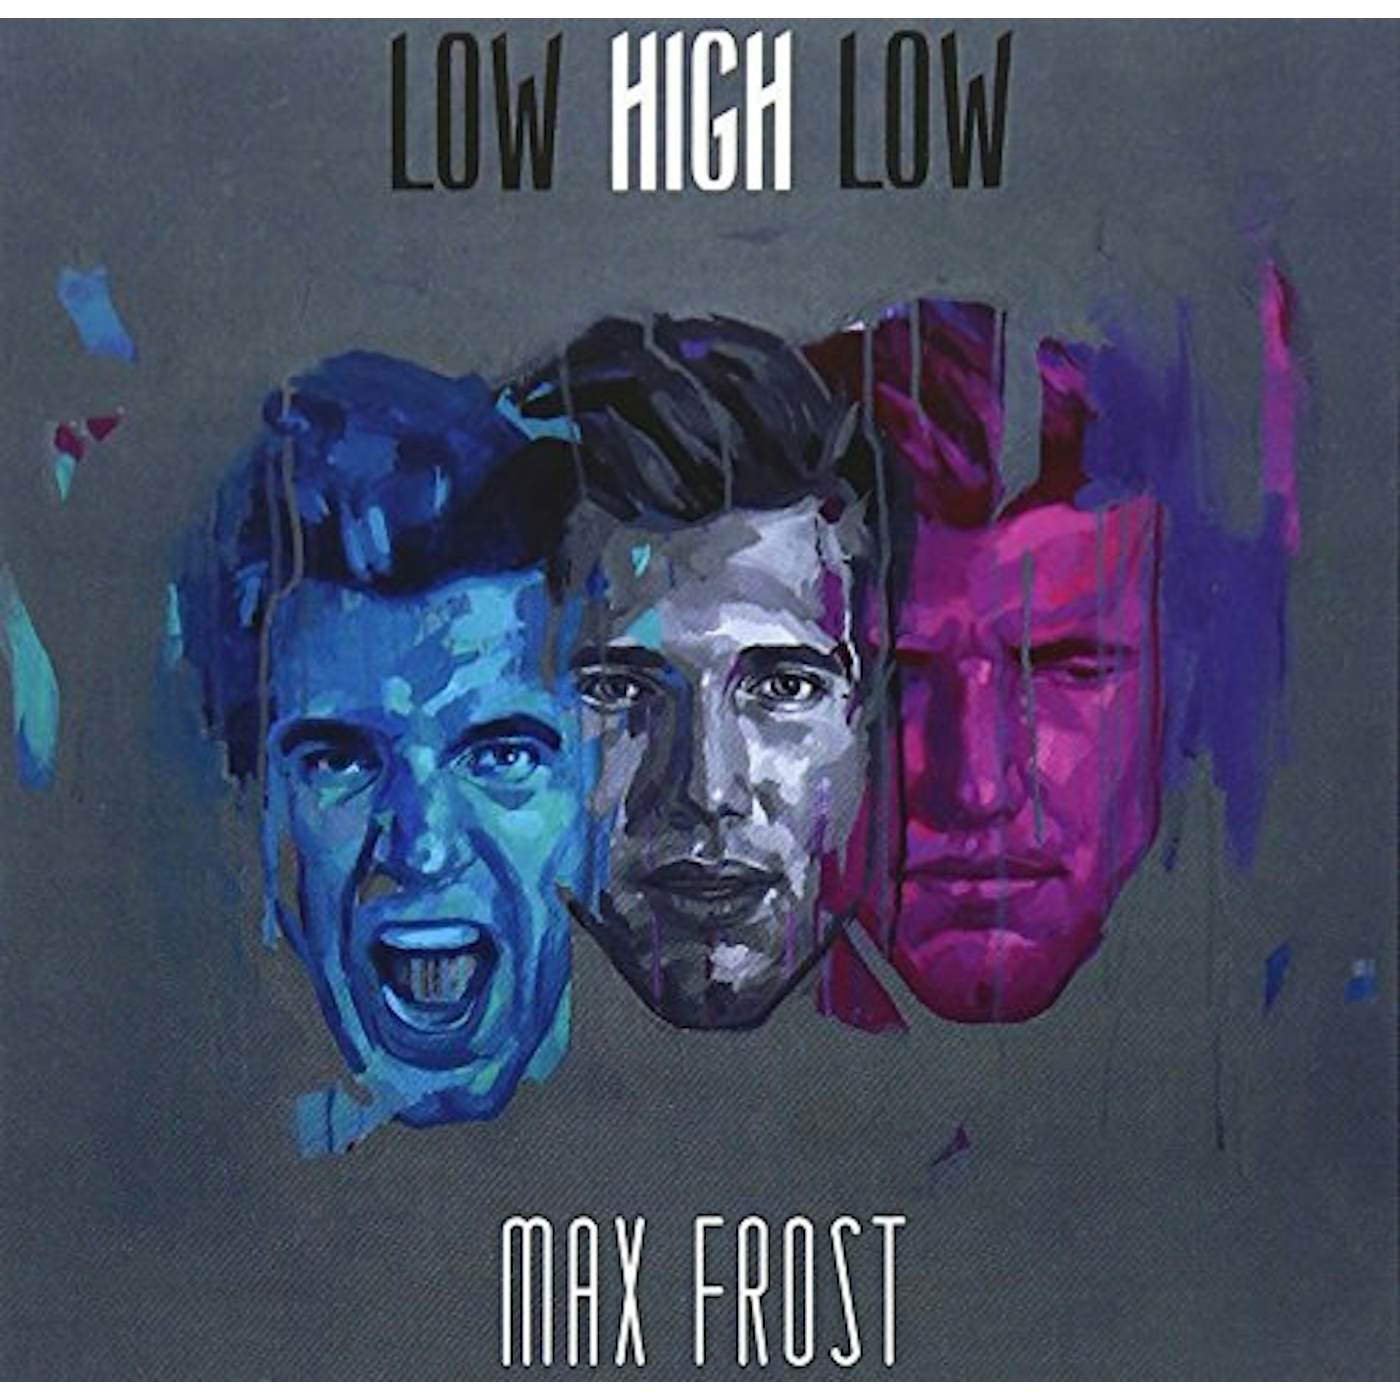 Max Frost LOW HIGH LOW CD